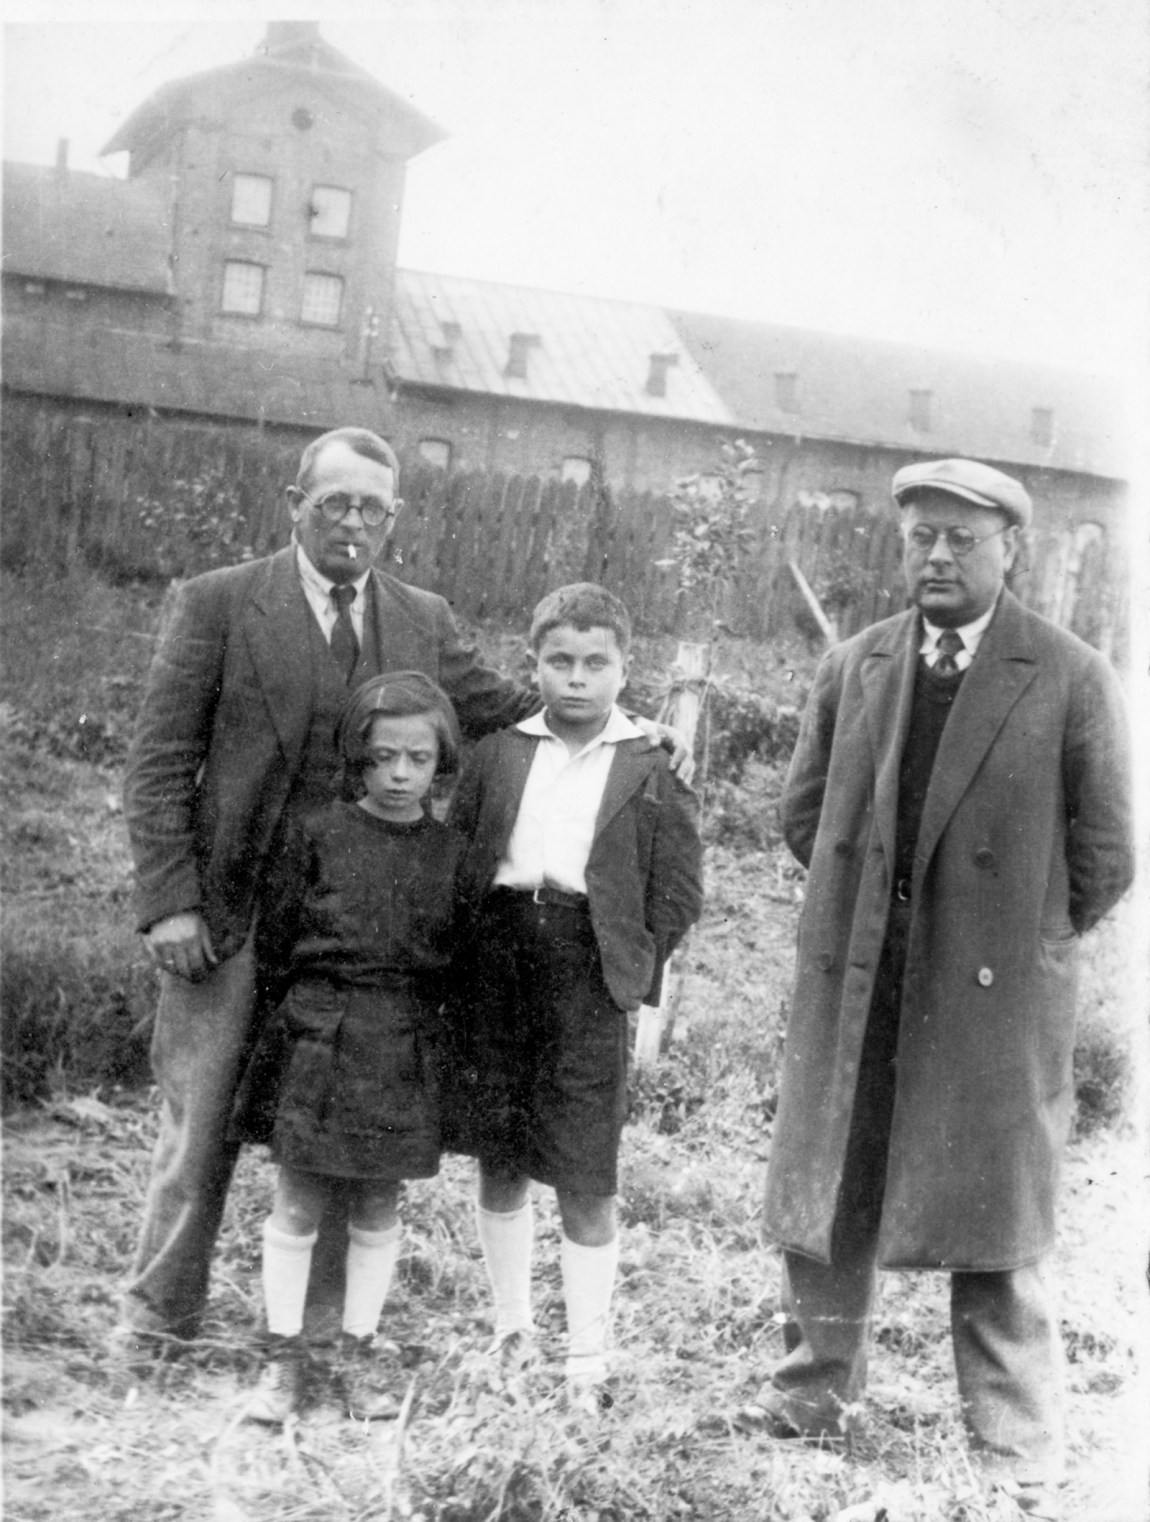 Hannan Teitel with his uncle Icok, sister Regina, and father Zindel